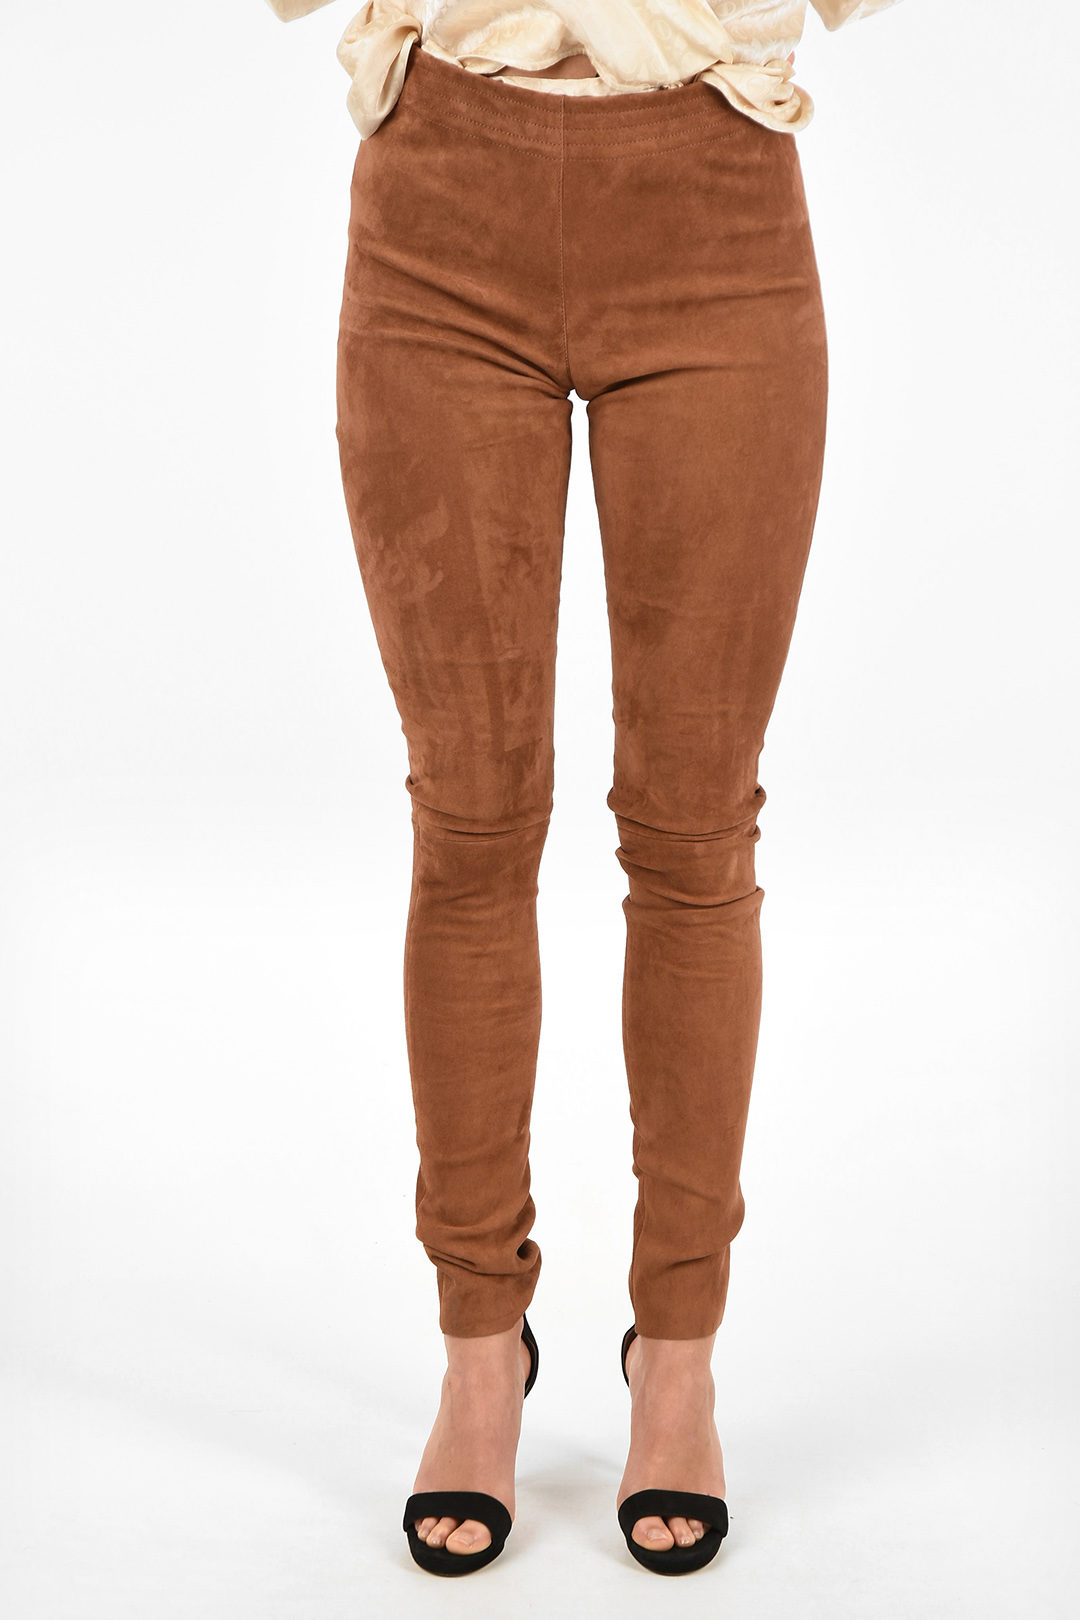 DROMe Suede leather Bootcut Pants women - Glamood Outlet